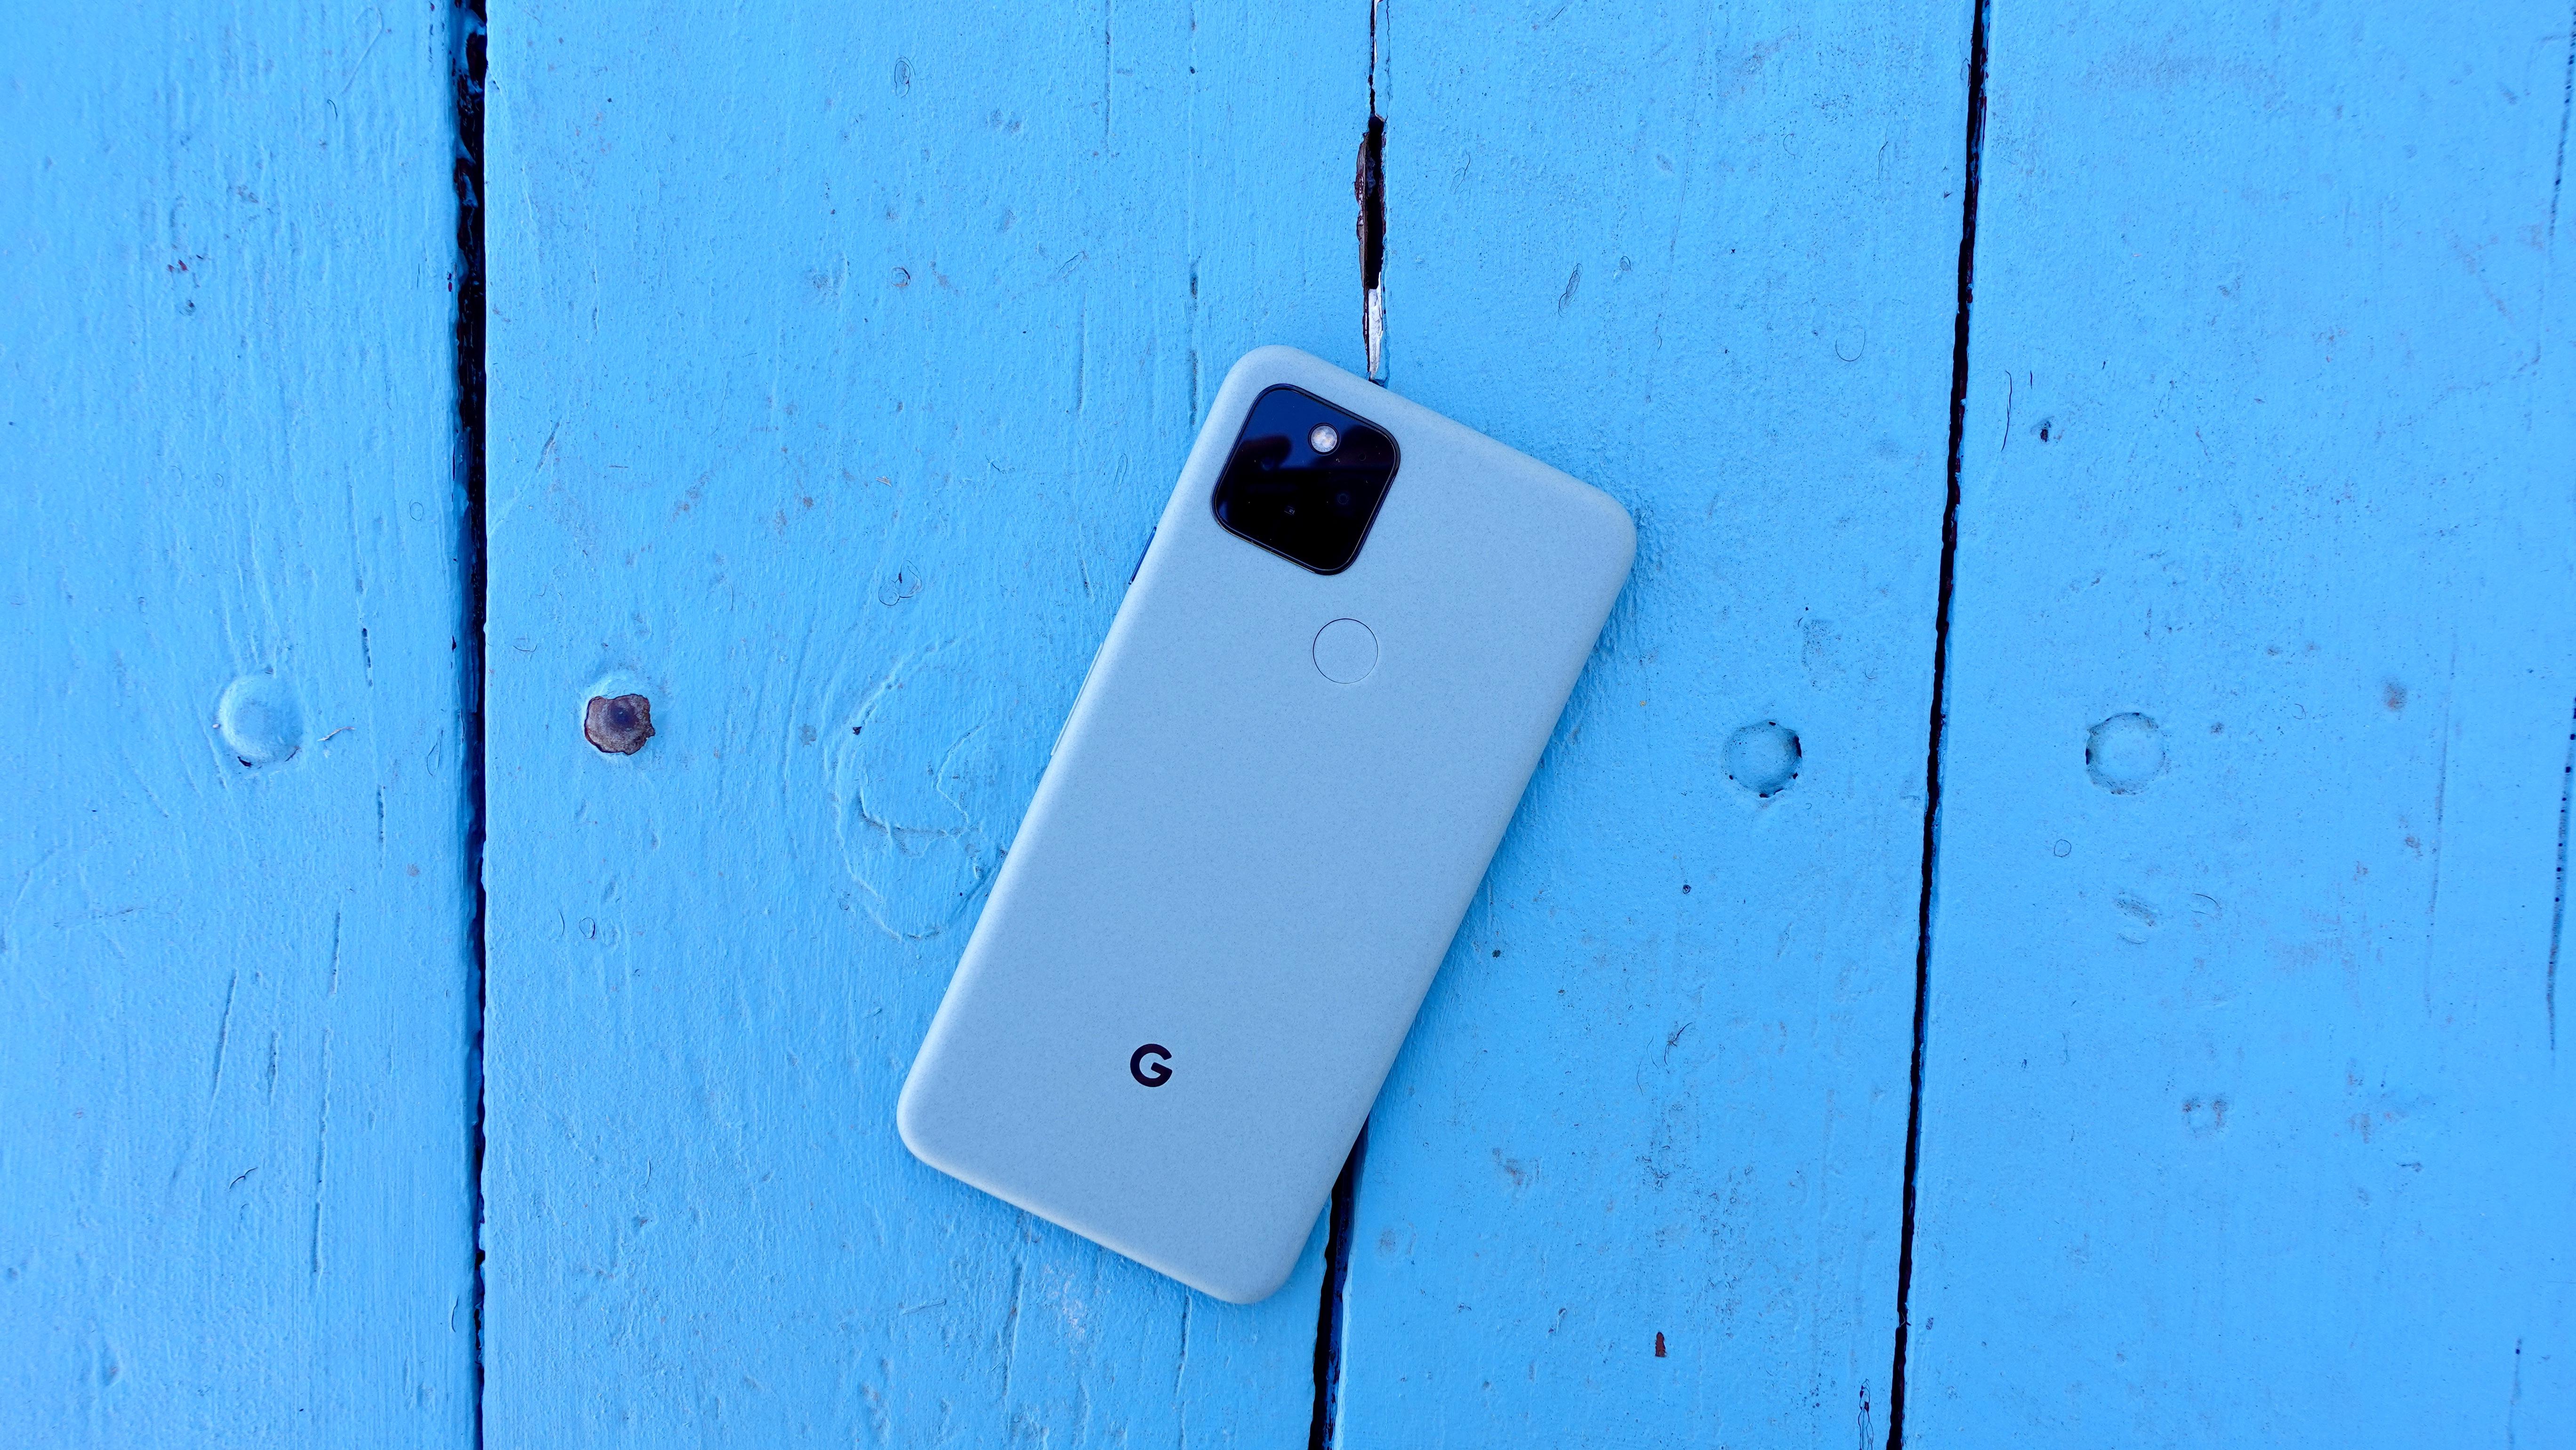 Google Pixel 5 review: Less is more. In fact, it's exceptional